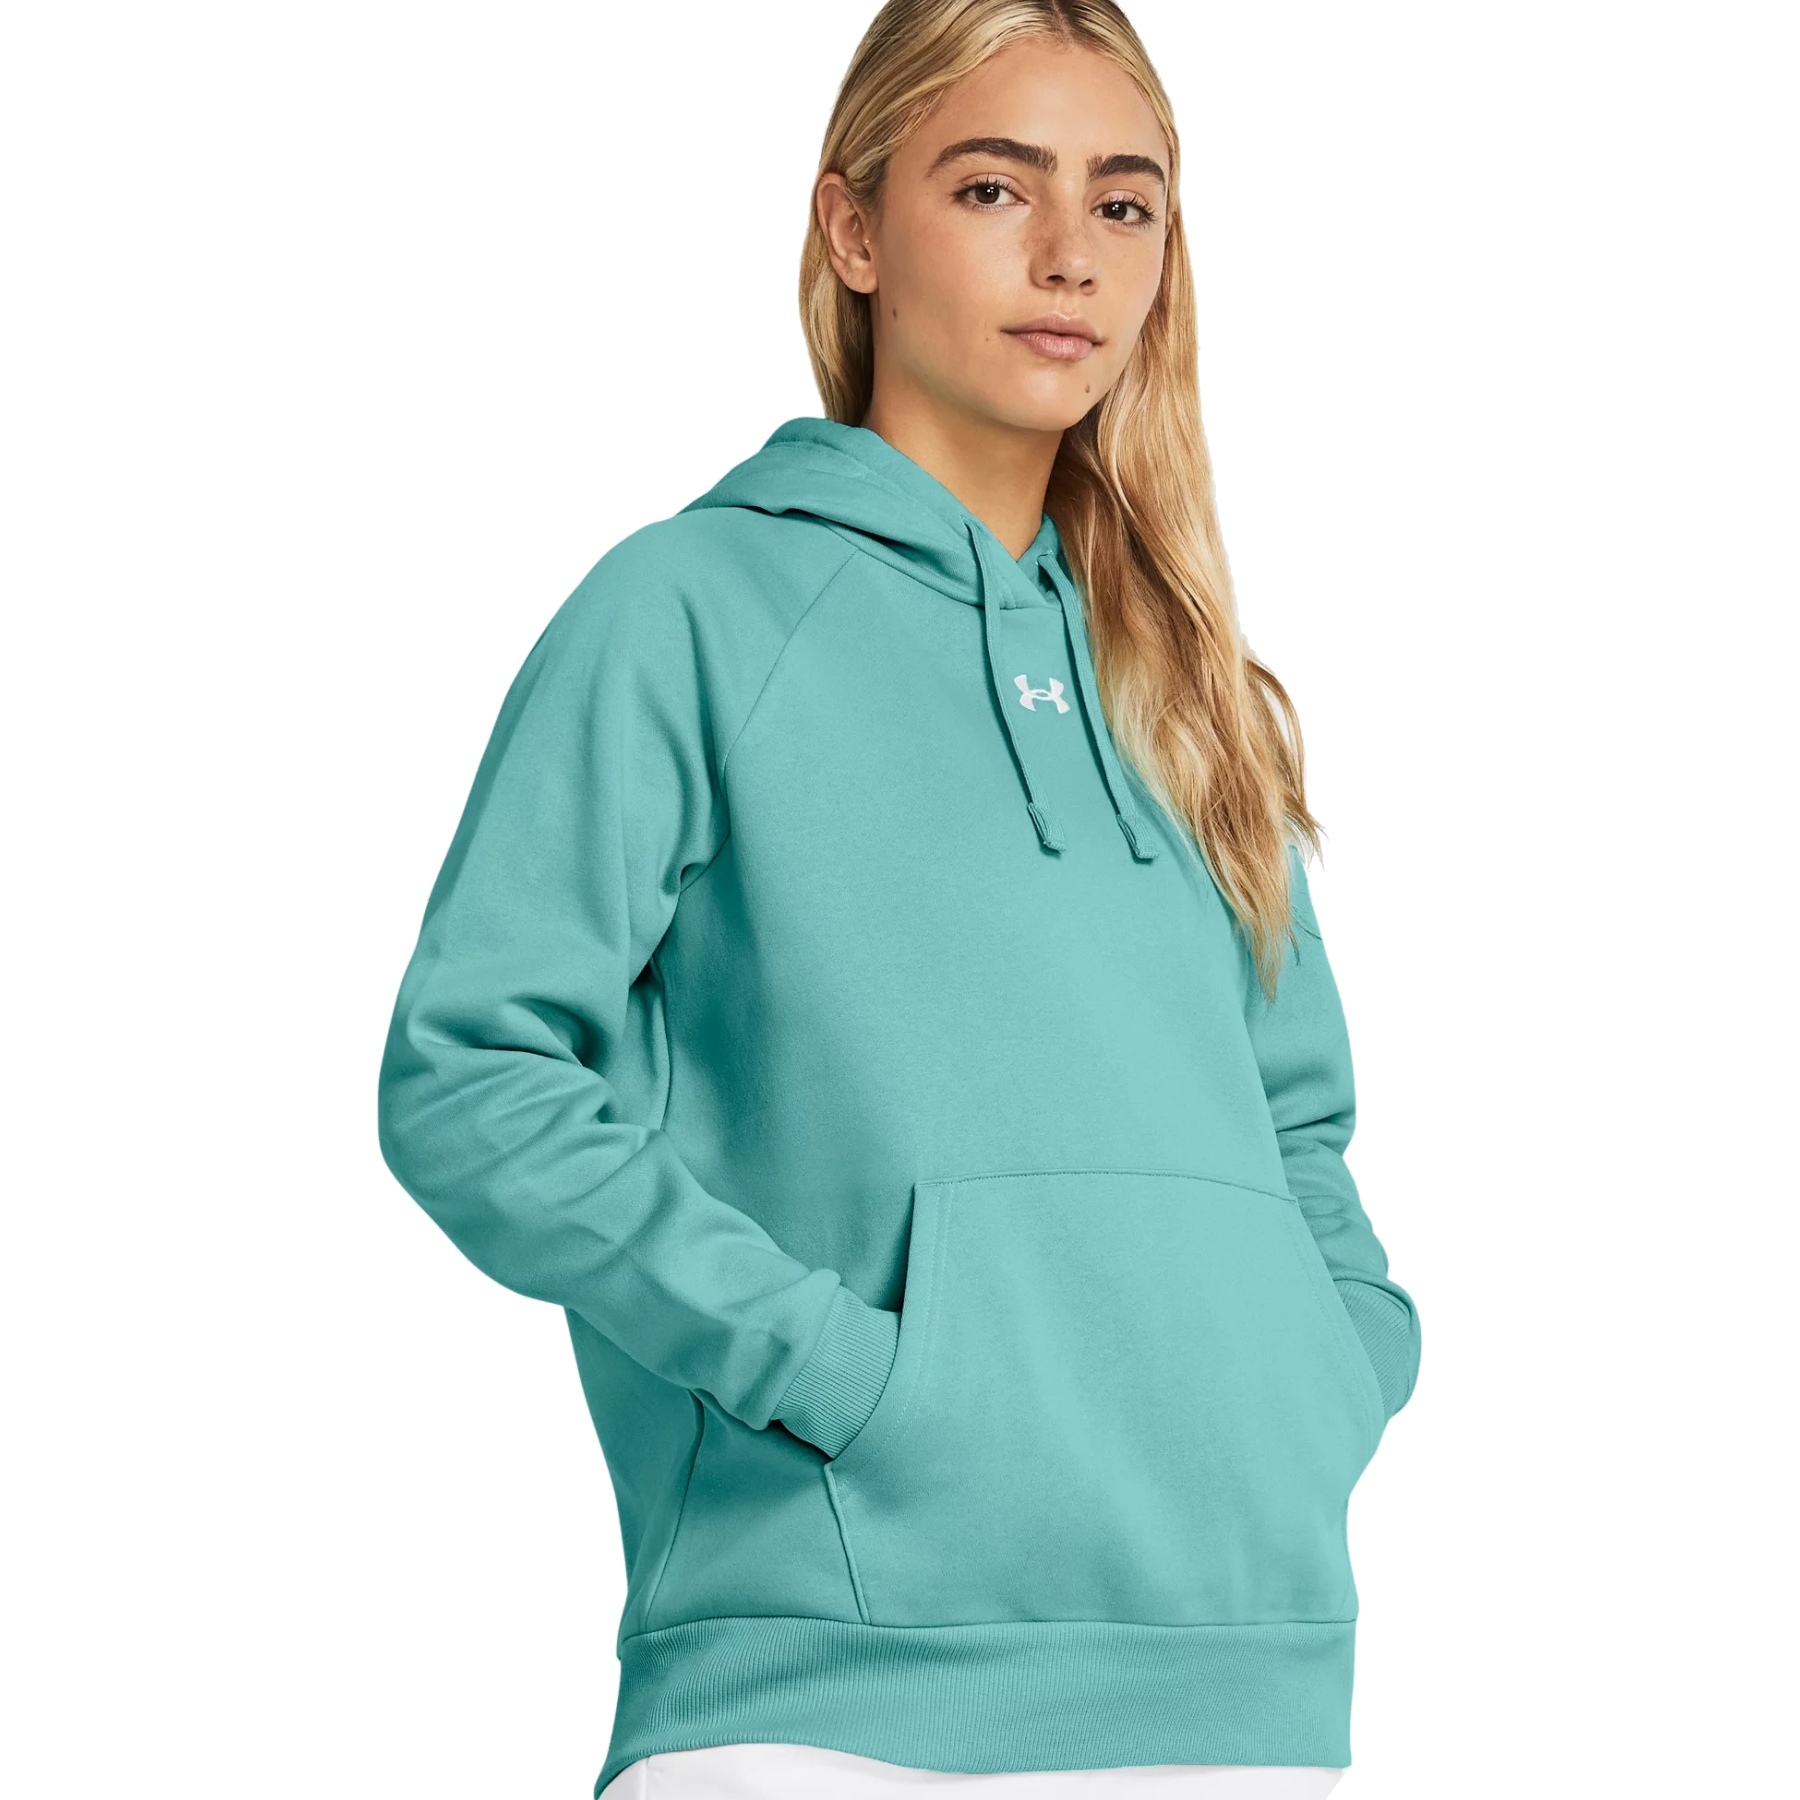 Under Armour womens Rival Fleece Hoodie, (001) Black / / White, X-Small at   Women's Clothing store